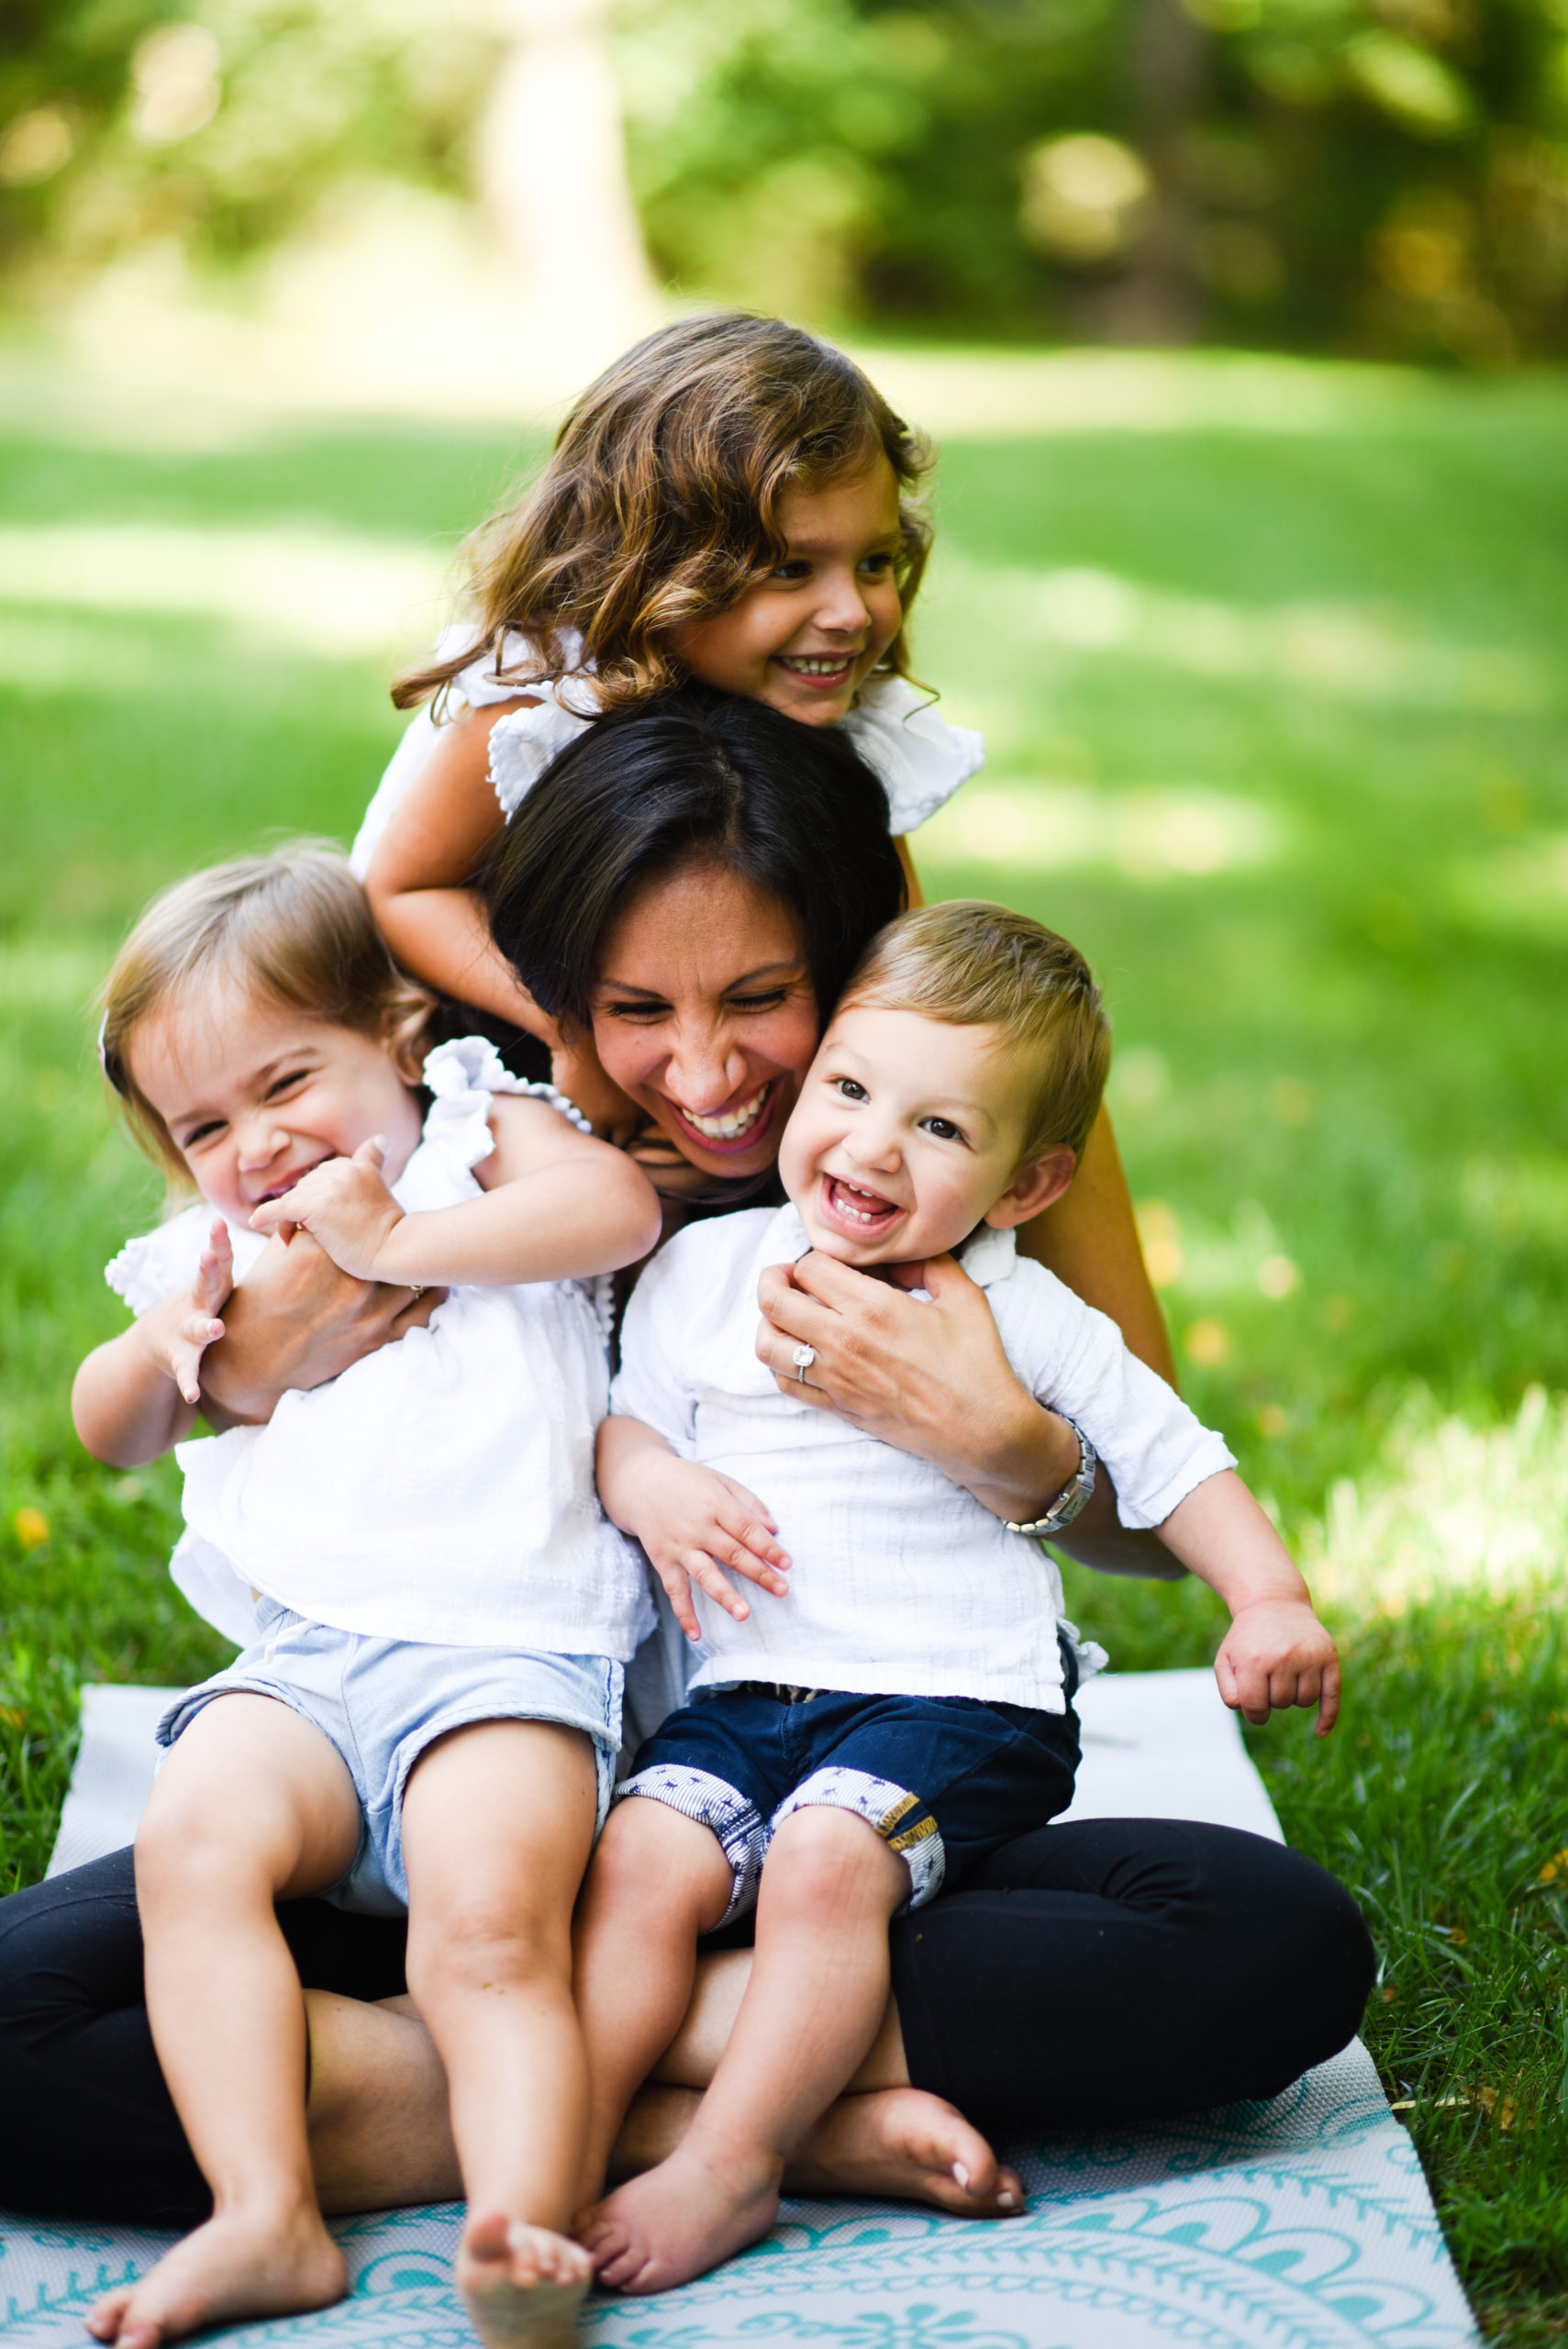 woman with 3 kids laughing